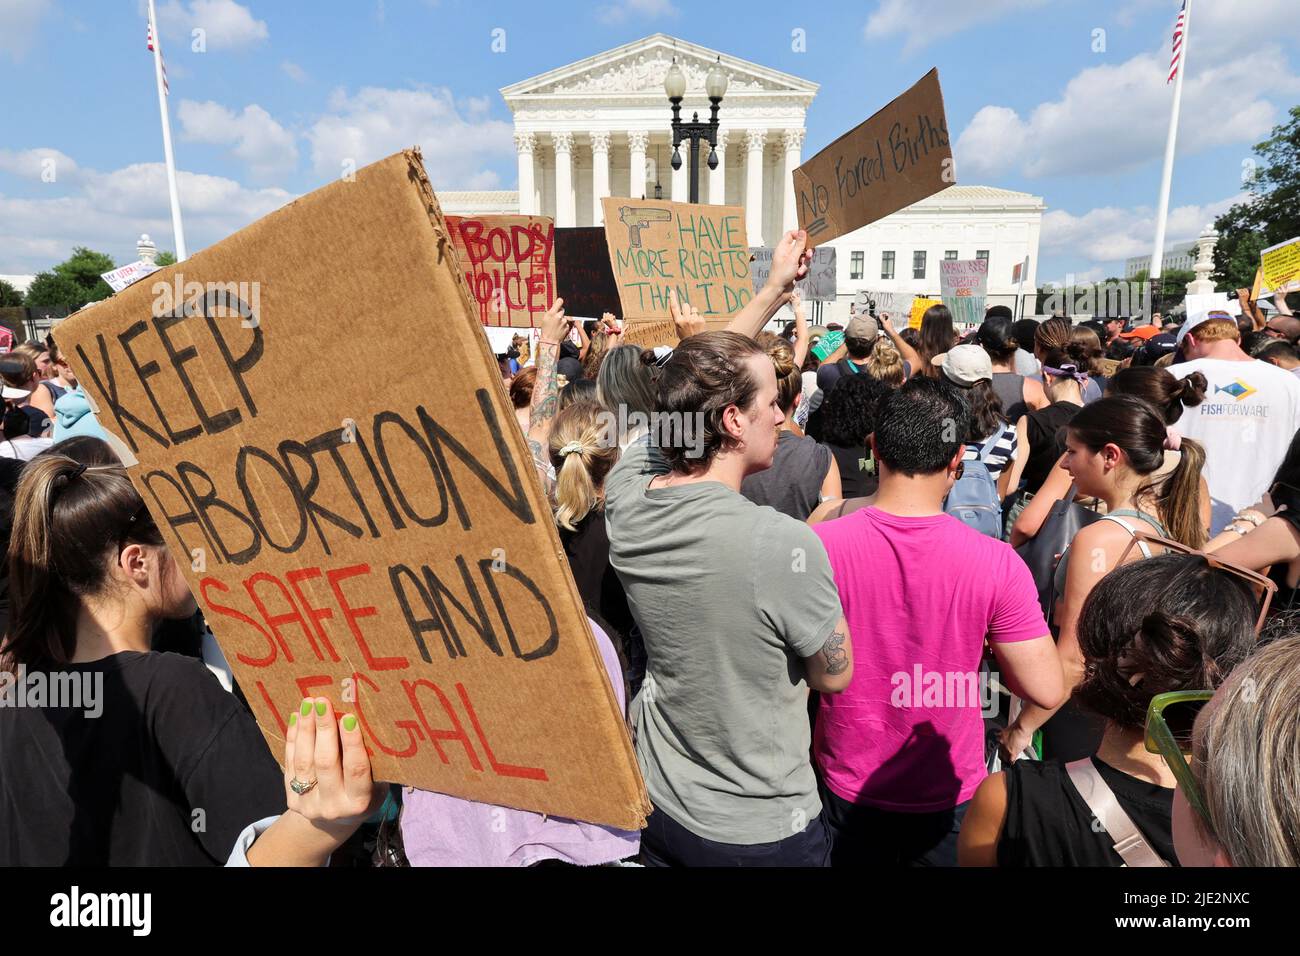 Abortion rights demonstrators protest outside the United States Supreme Court as the court rules in the Dobbs v Women's Health Organization abortion case, overturning the landmark Roe v Wade abortion decision in Washington, U.S., June 24, 2022. REUTERS/Jim Bourg Stock Photo